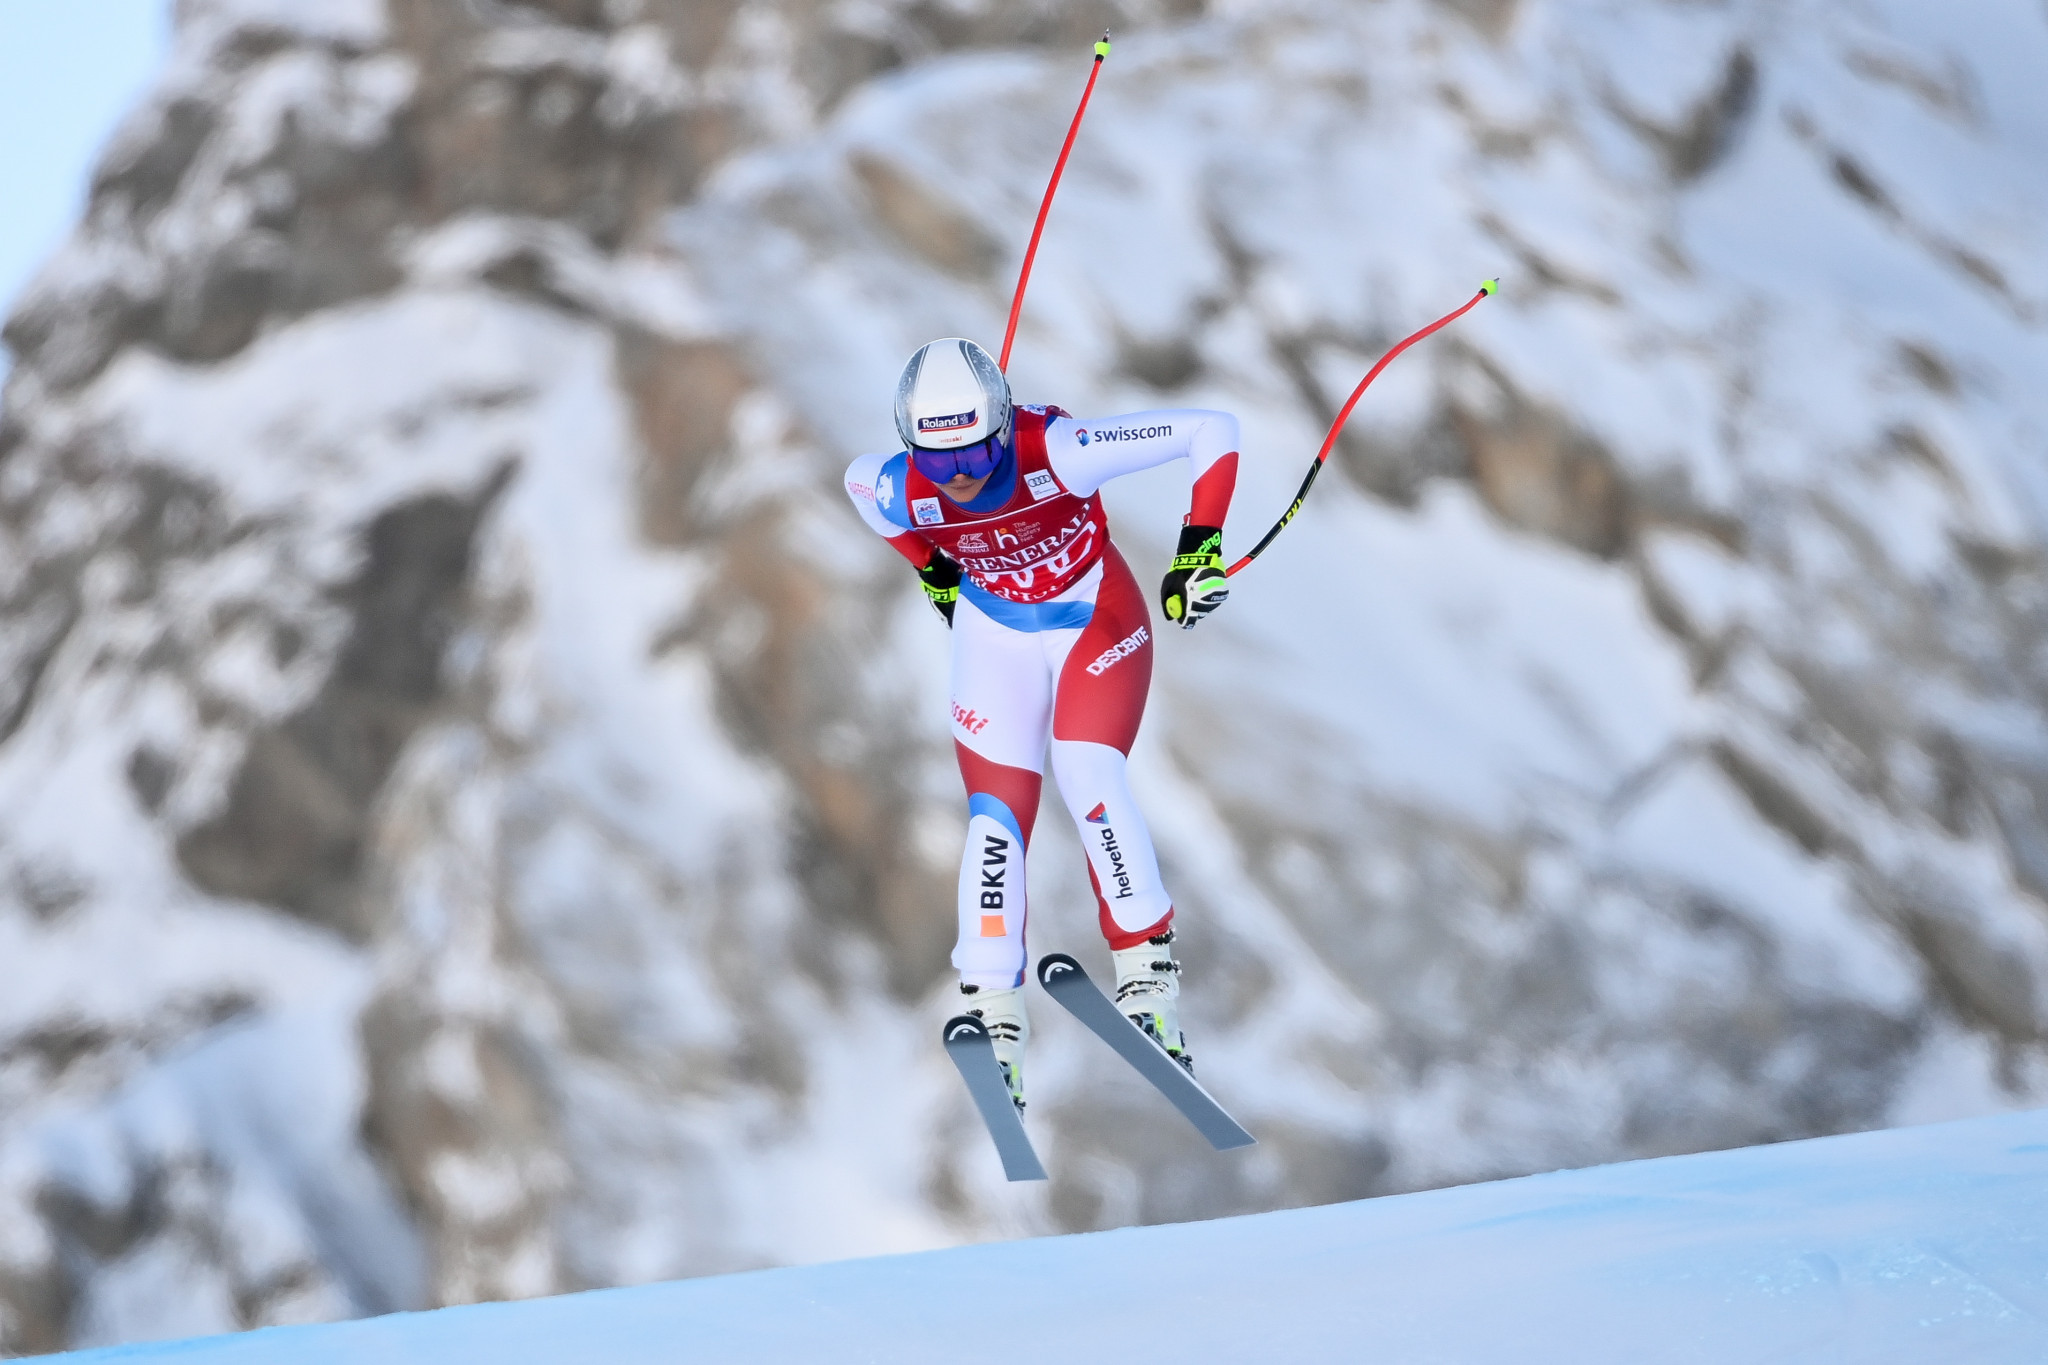 Reigning champion Suter wins first women's downhill race of World Cup